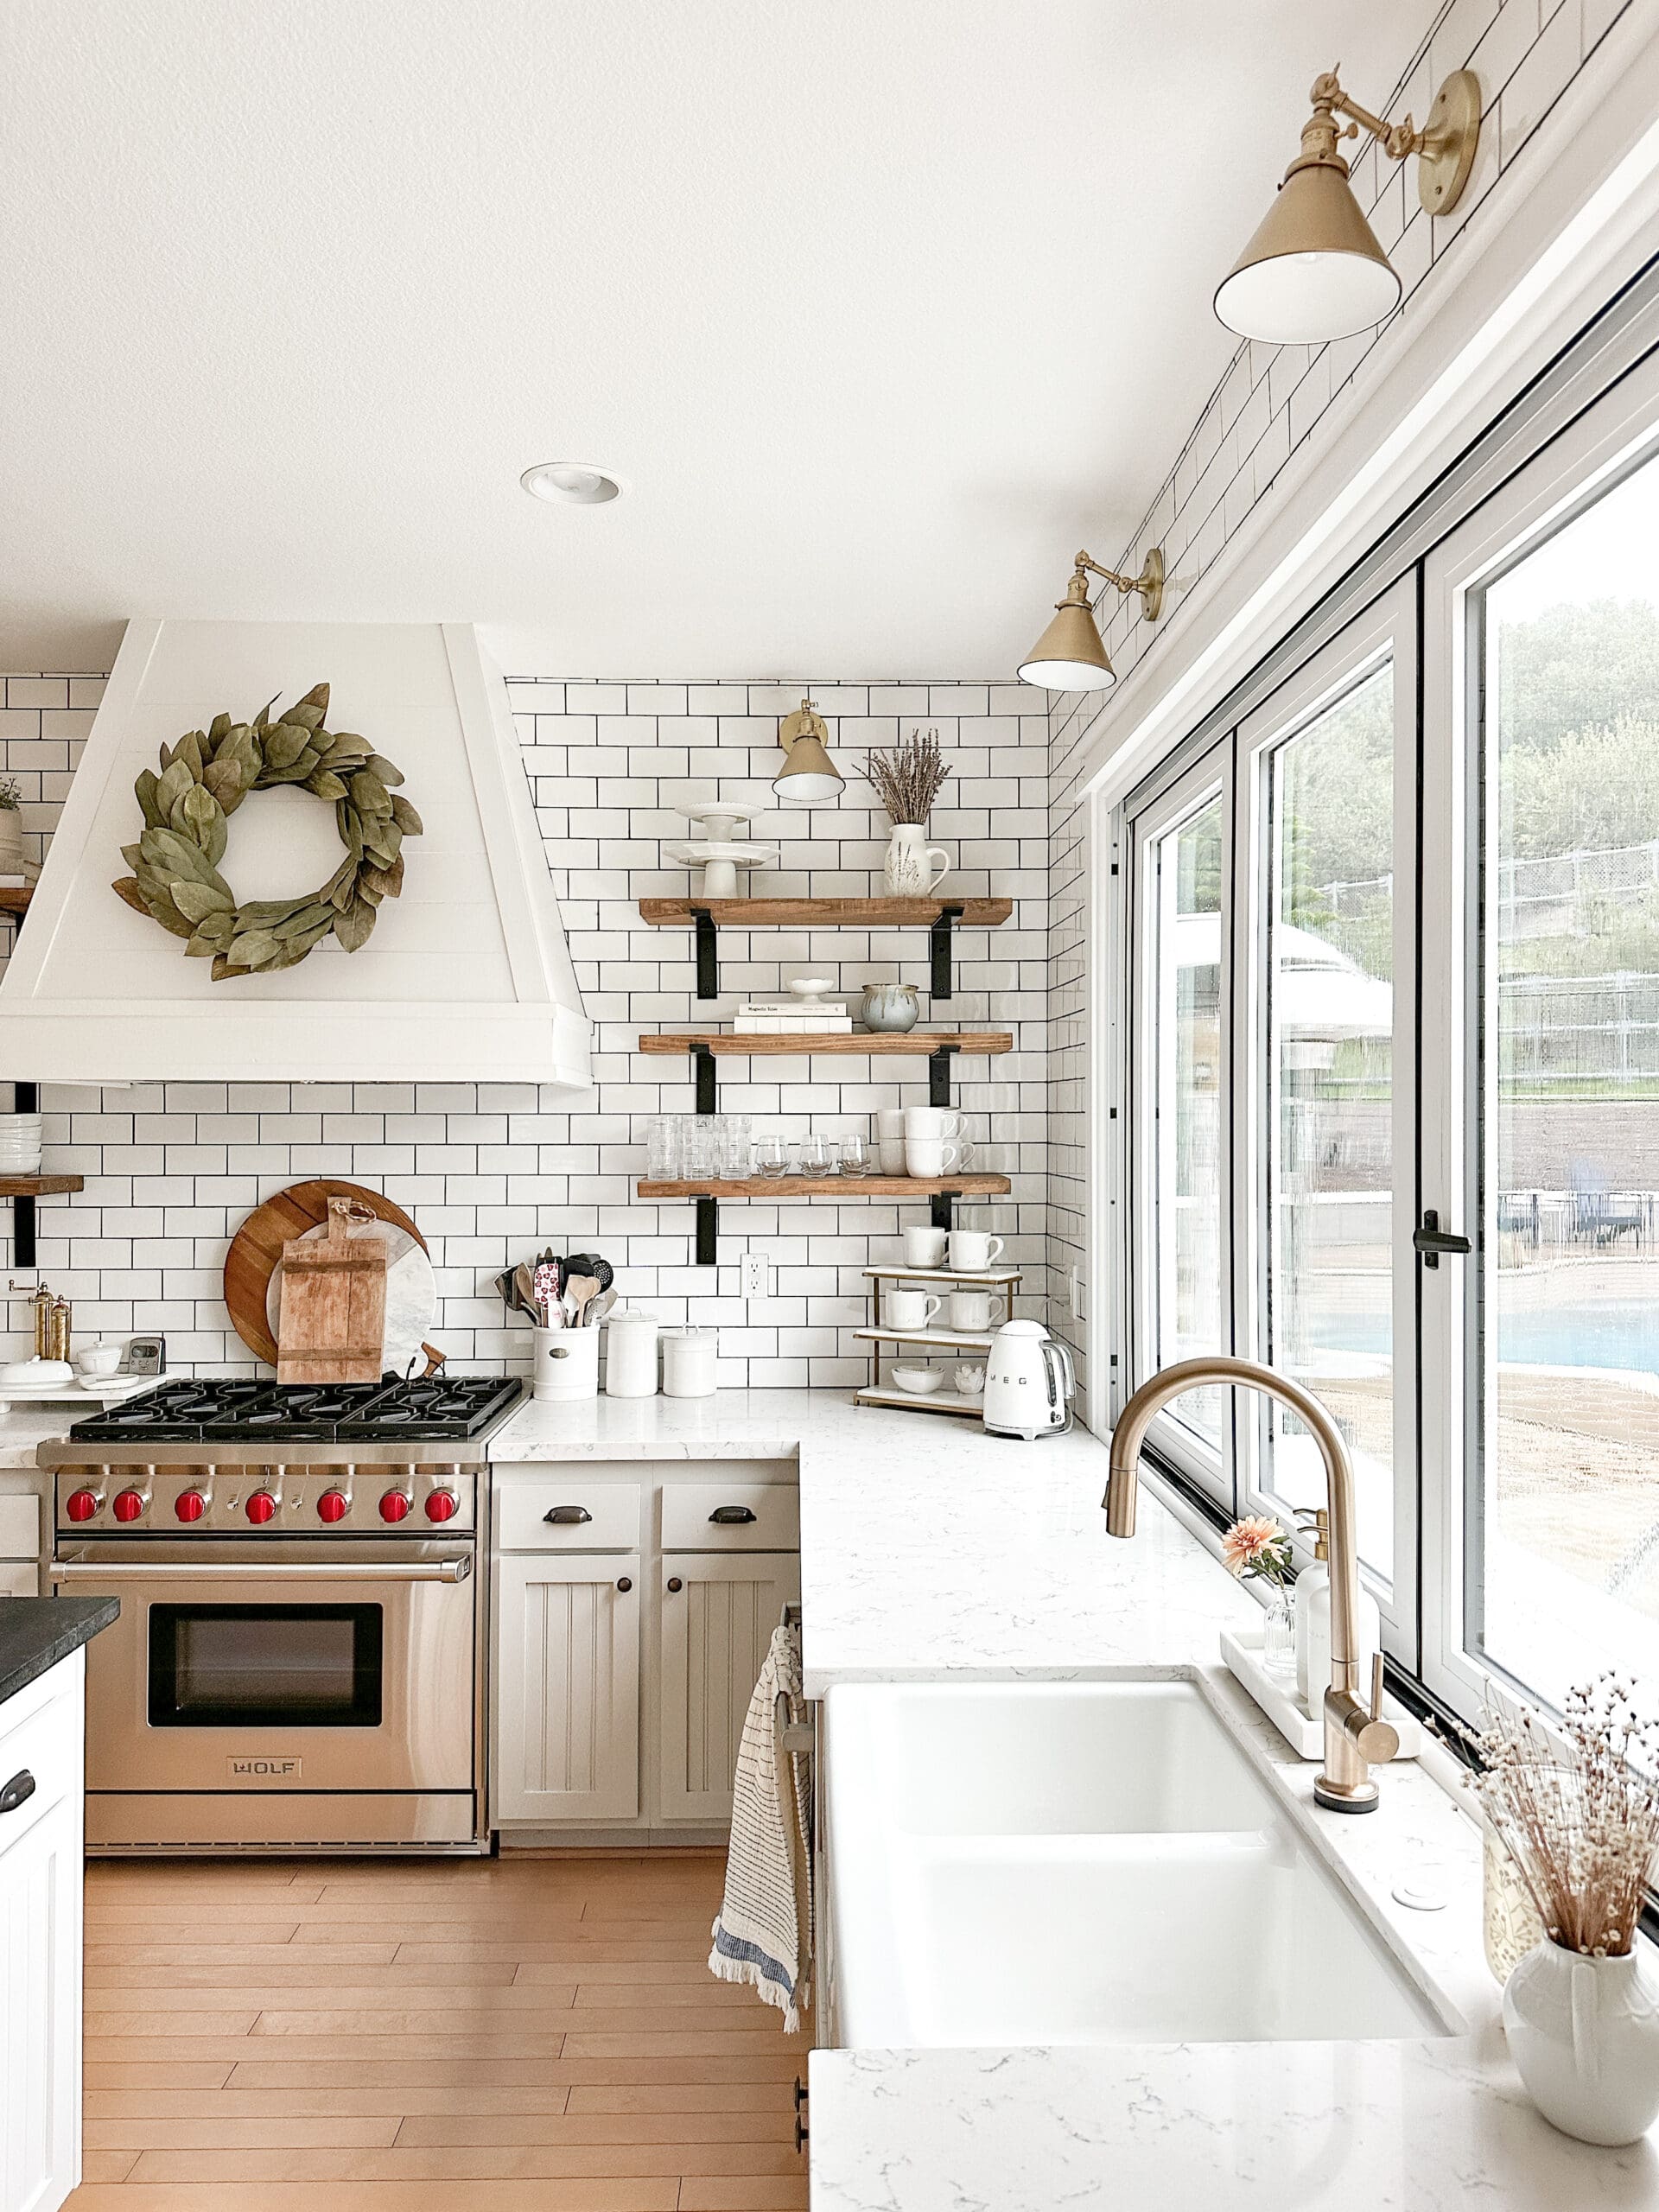 https://robynsfrenchnest.com/wp-content/uploads/2023/04/Pasha-is-Home-kitchen-roundup-2023-scaled.jpg